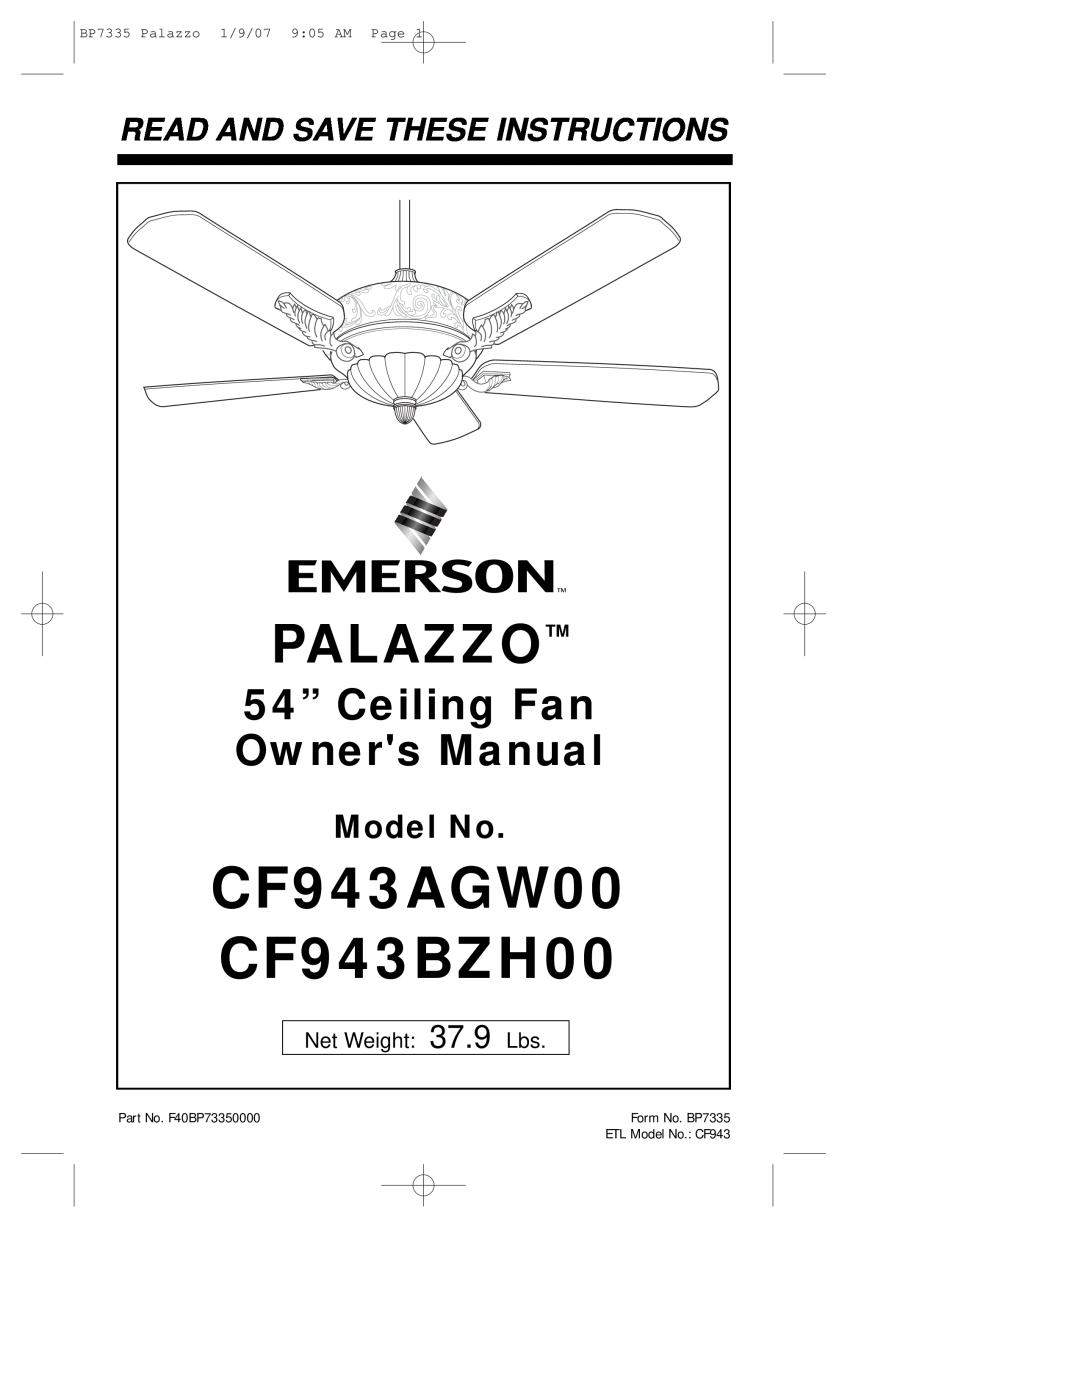 Emerson owner manual CF943AGW00 CF943BZH00, Palazzo, Model No, Read And Save These Instructions, Net Weight 37.9 Lbs 